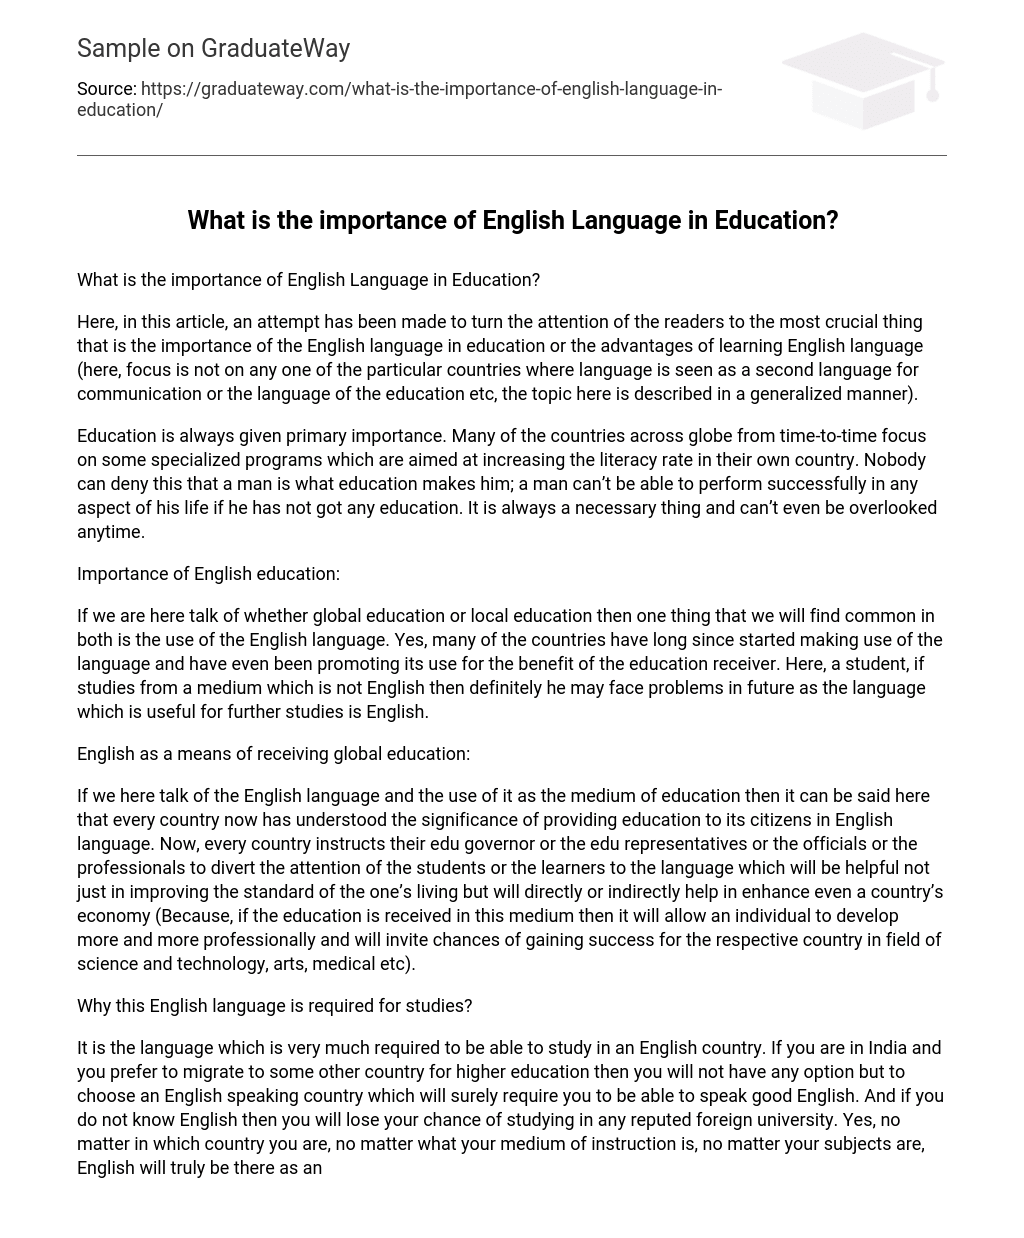 What is the importance of English Language in Education?